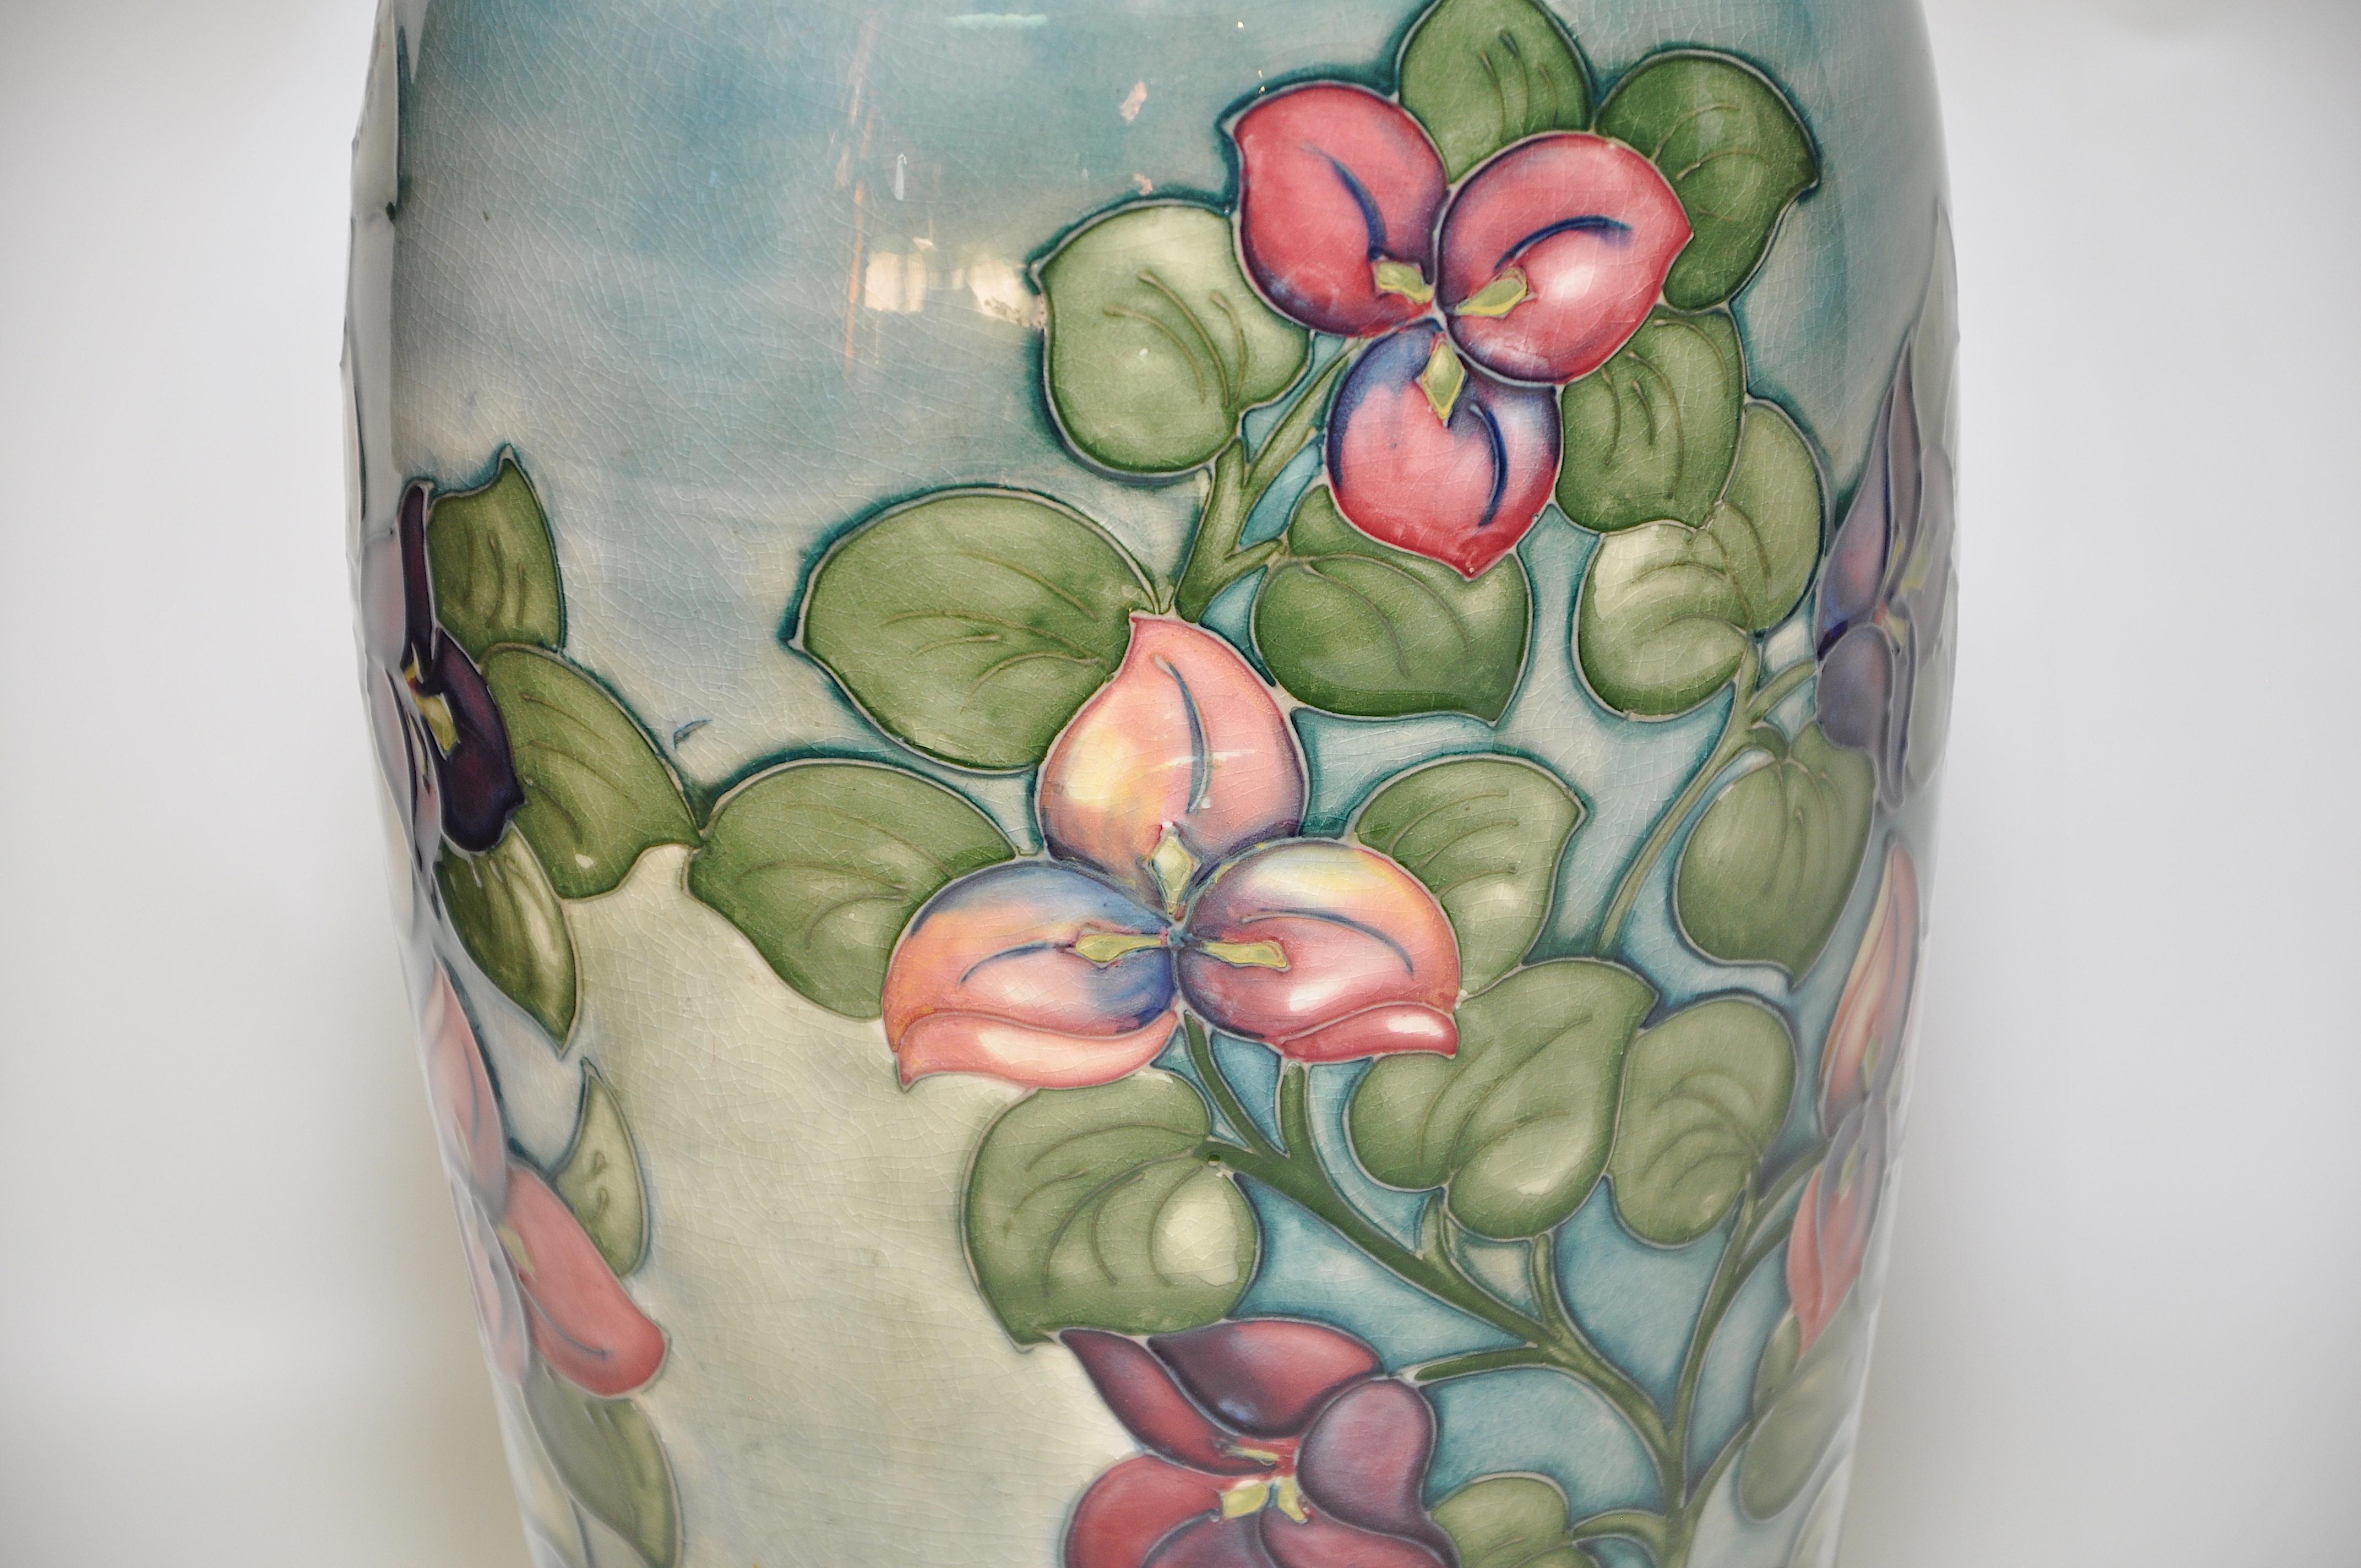 Large Moorcroft vase pot blue green Bougainvillaea flowers English art pottery.

Superb, fabulous, large Moorcroft, flamboyant, dramatic and in perfect condition. A perfect as a centre piece to dining table, collectors item, or use functionally